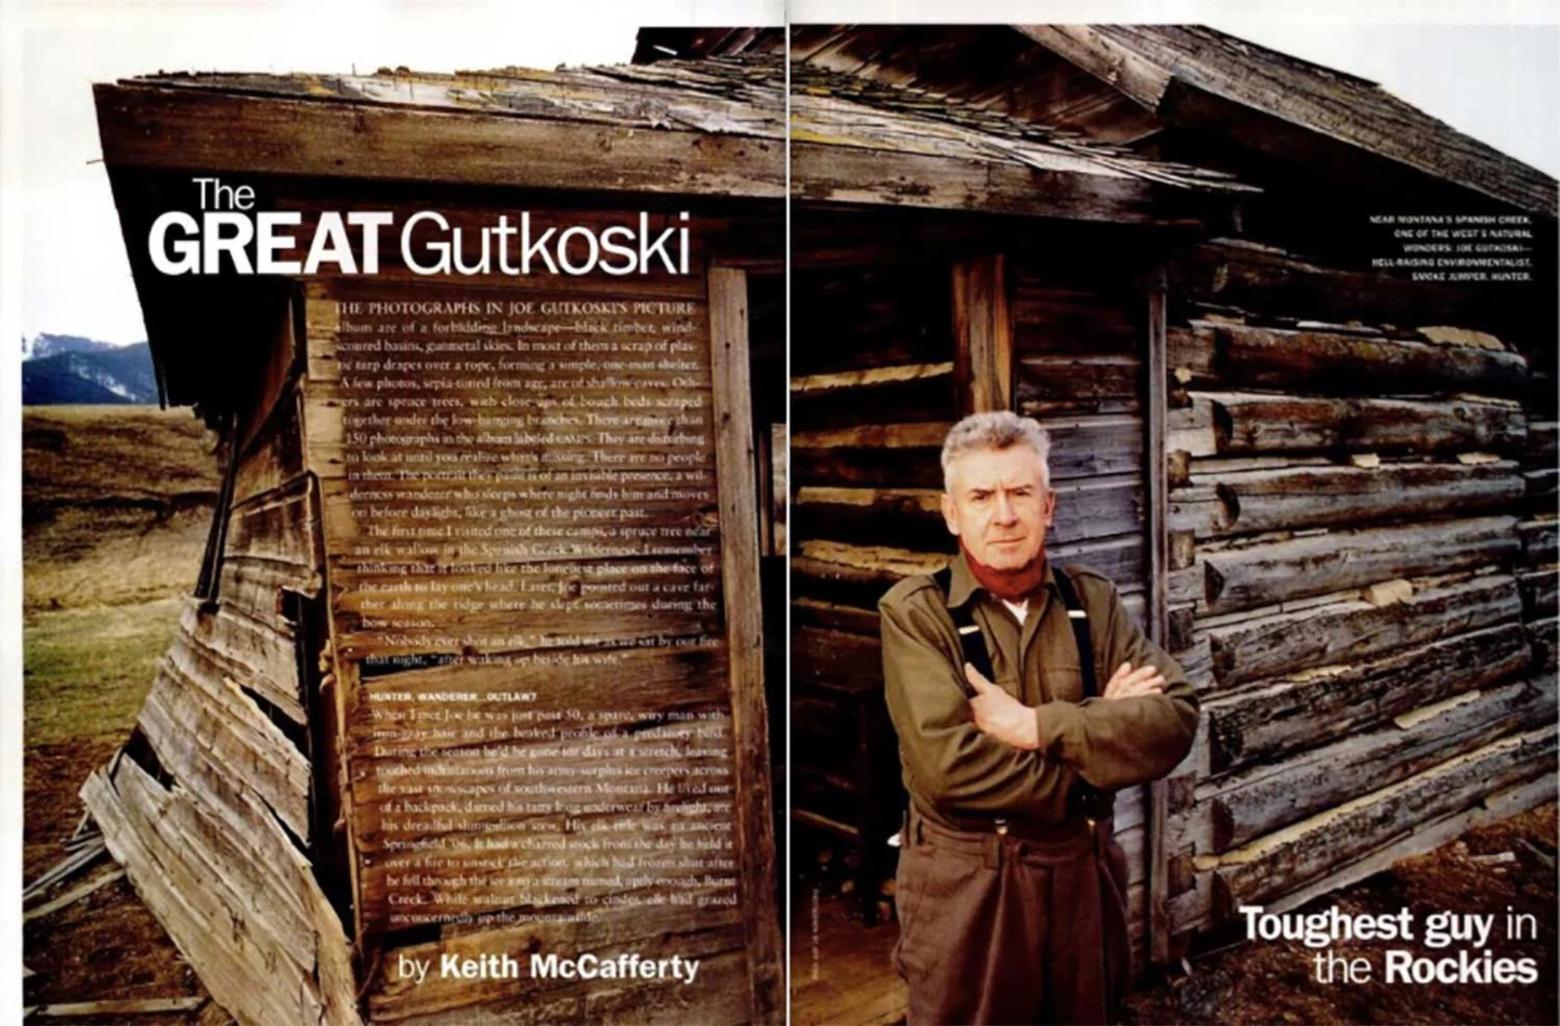 A screen shot of the double page spread featuring Joe Gutkoski that Keith McCafferty wrote for Field &amp; Stream magazine in September 2002. For several years after, even as he moved into his 80s, Gutkoski never slowed down in his study and advocacy of wild places.